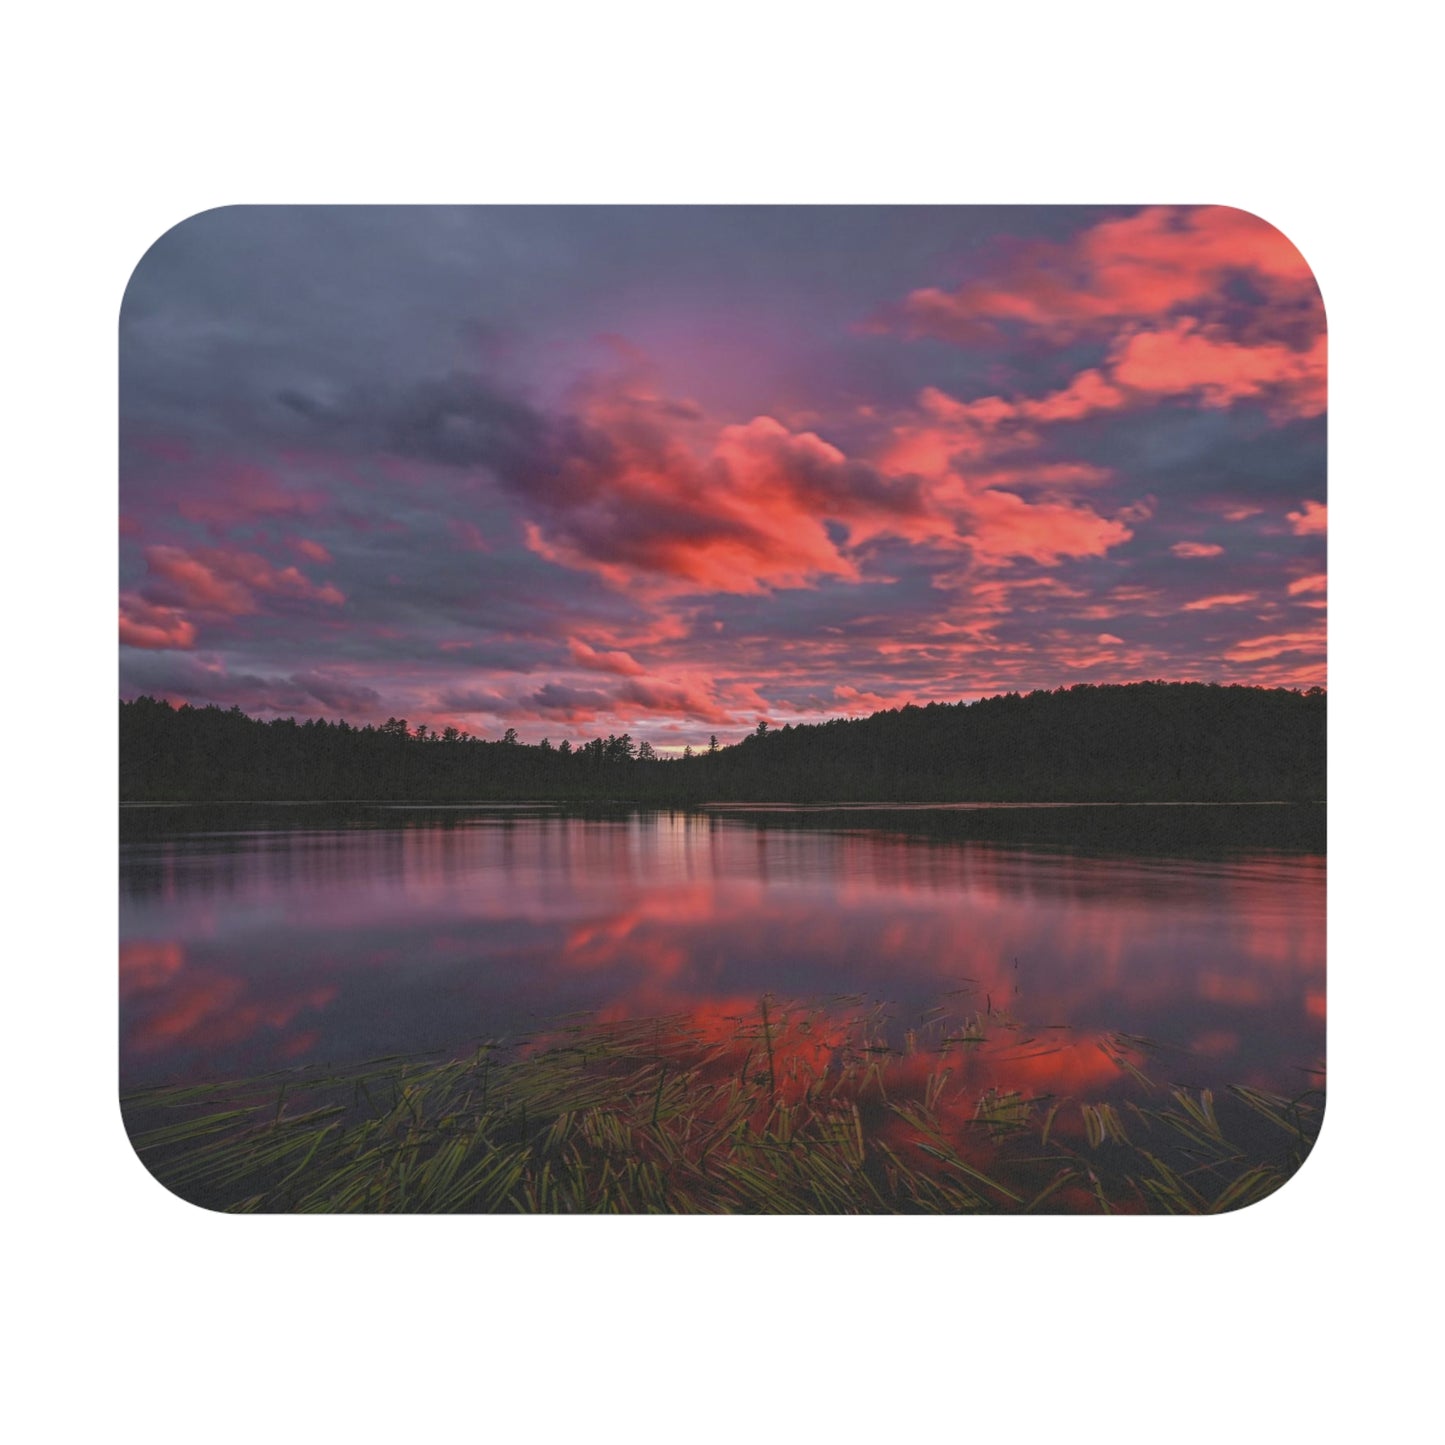 Reflections of Summer, Colby Lake Mouse Pad